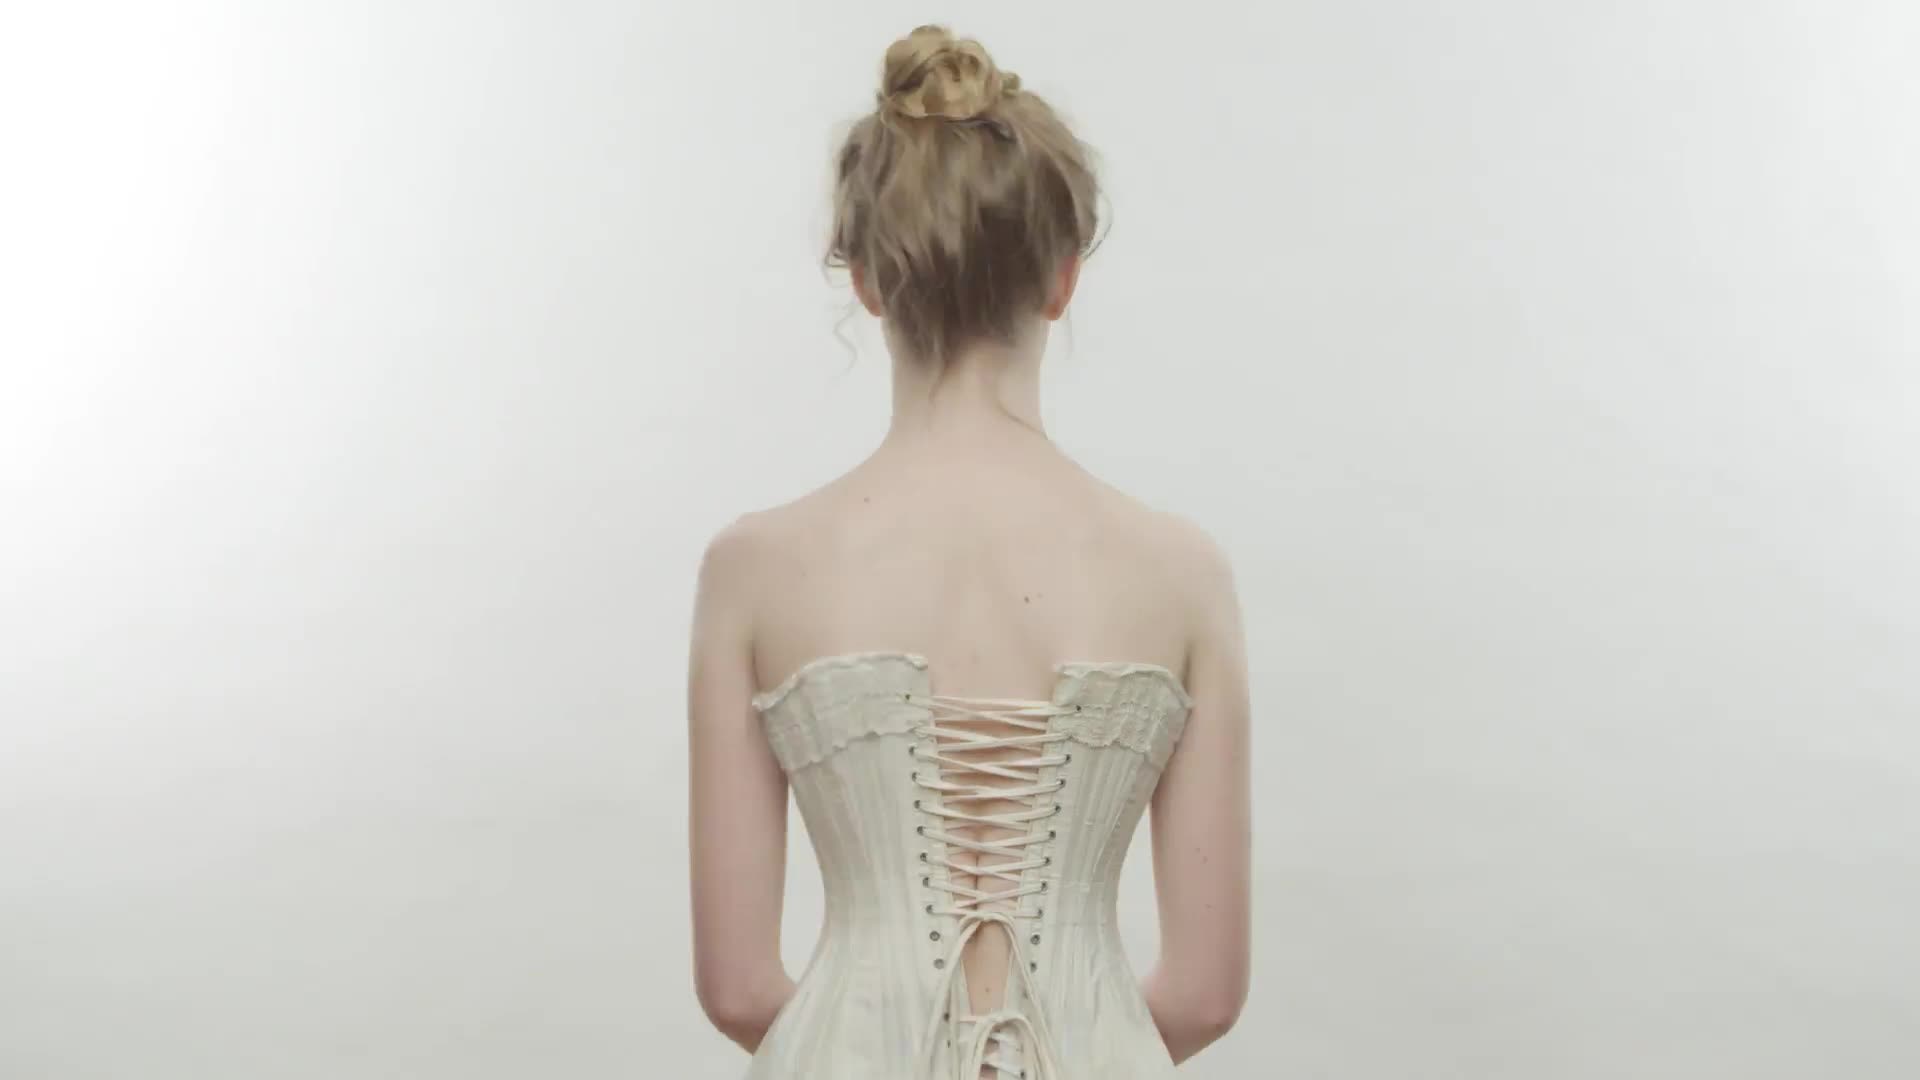 Watch The History of the Bra, Evolution